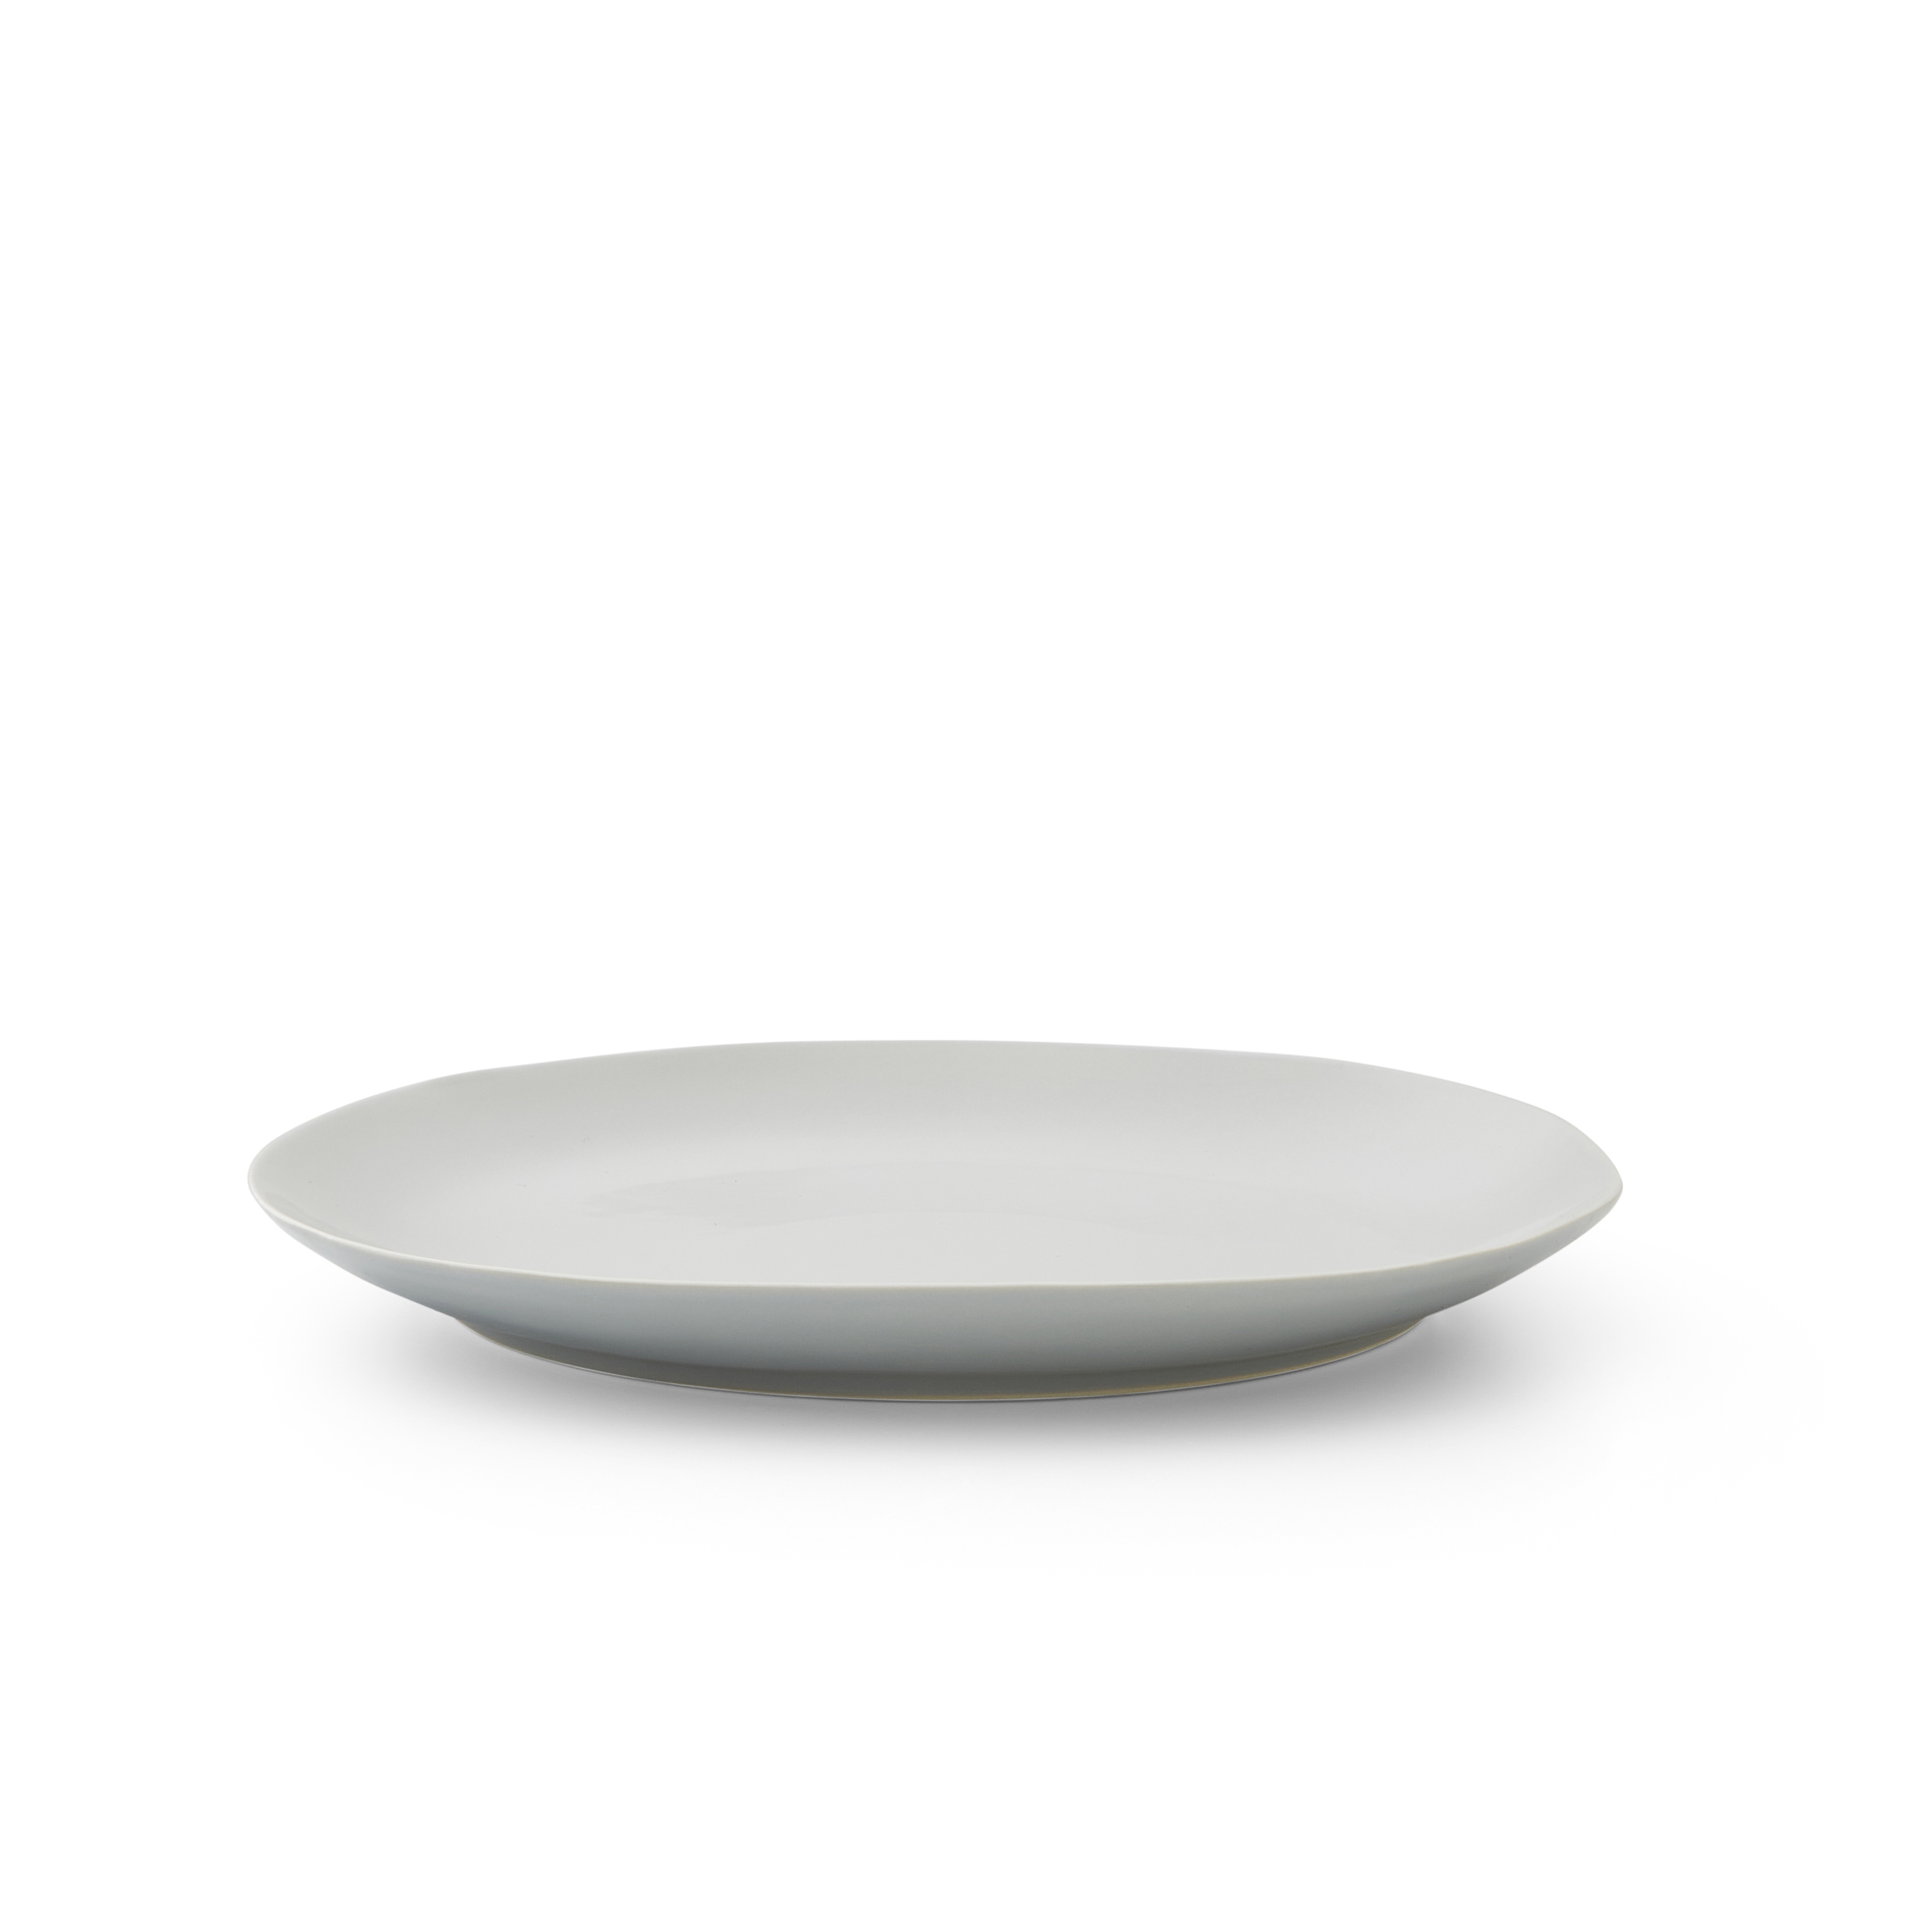 Sophie Conran Arbor 11" Dinner Plate- Dove Grey image number null